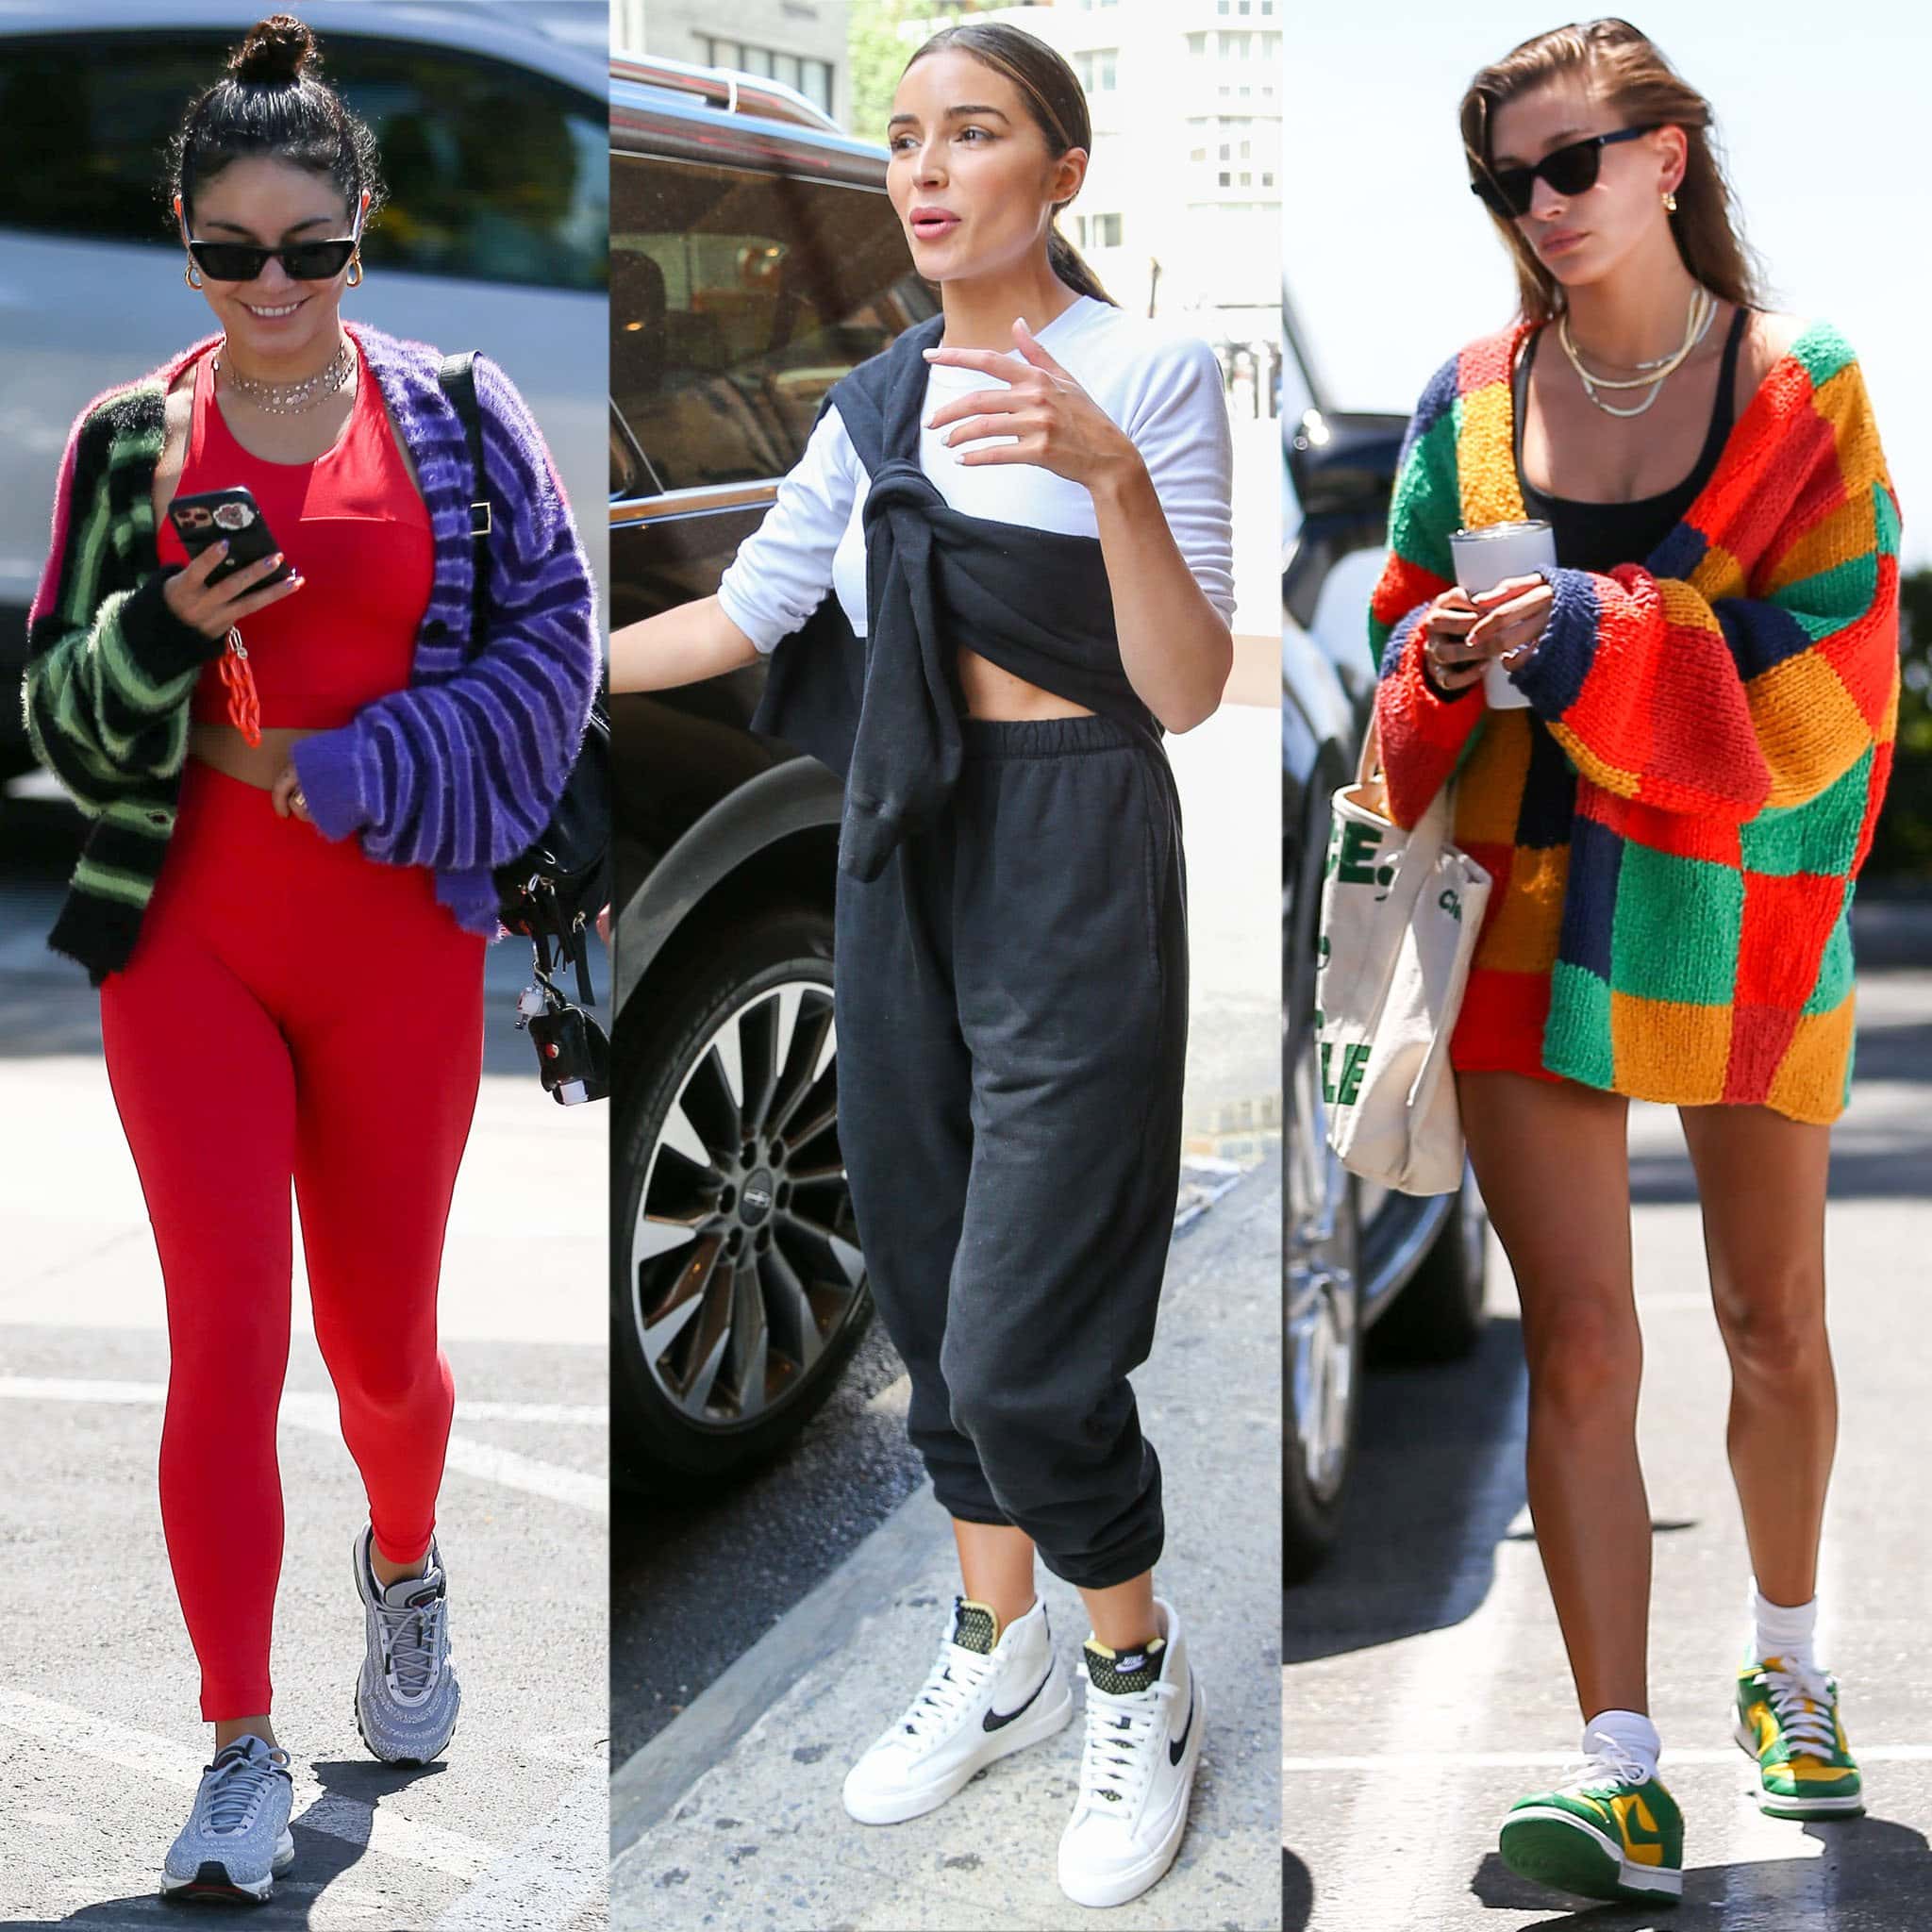 Celebrities like Vanessa Hudgens, Olivia Culpo, and Hailey Bieber have embraced the athleisure trend with Nike shoes as their go-to footwear